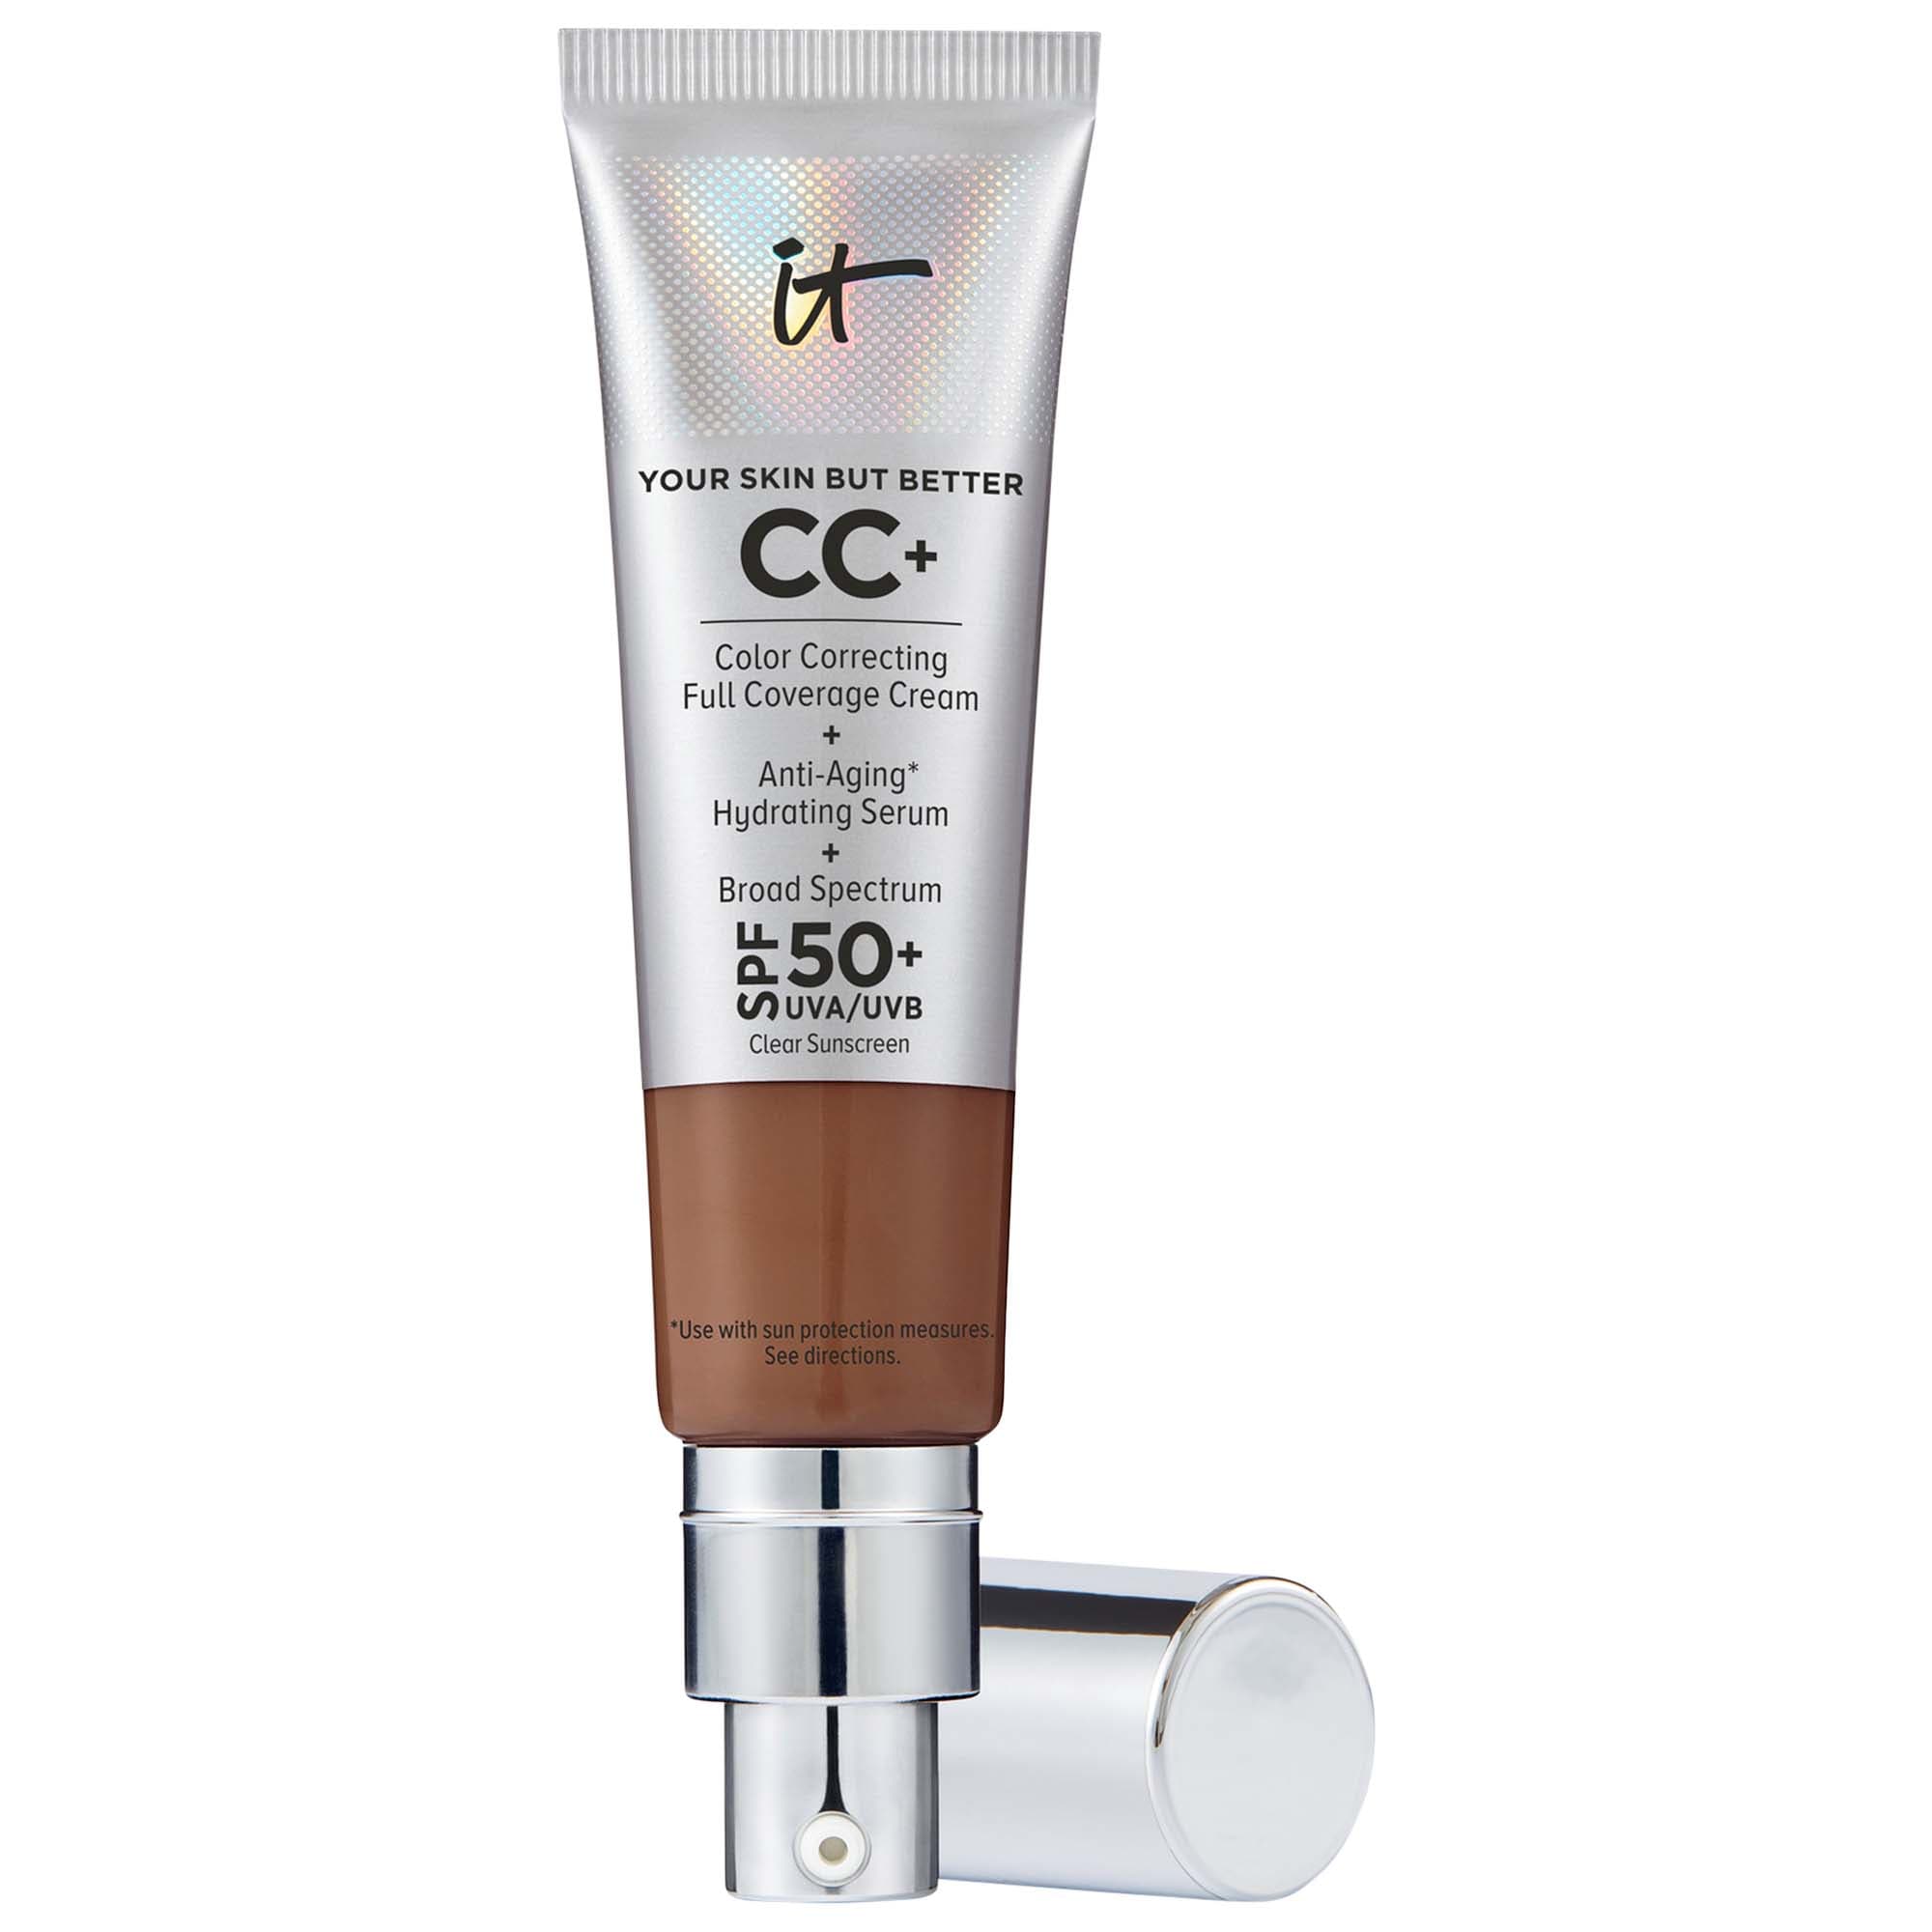 Cc+ Cream Full Coverage Color Correcting Foundation With Spf 50+